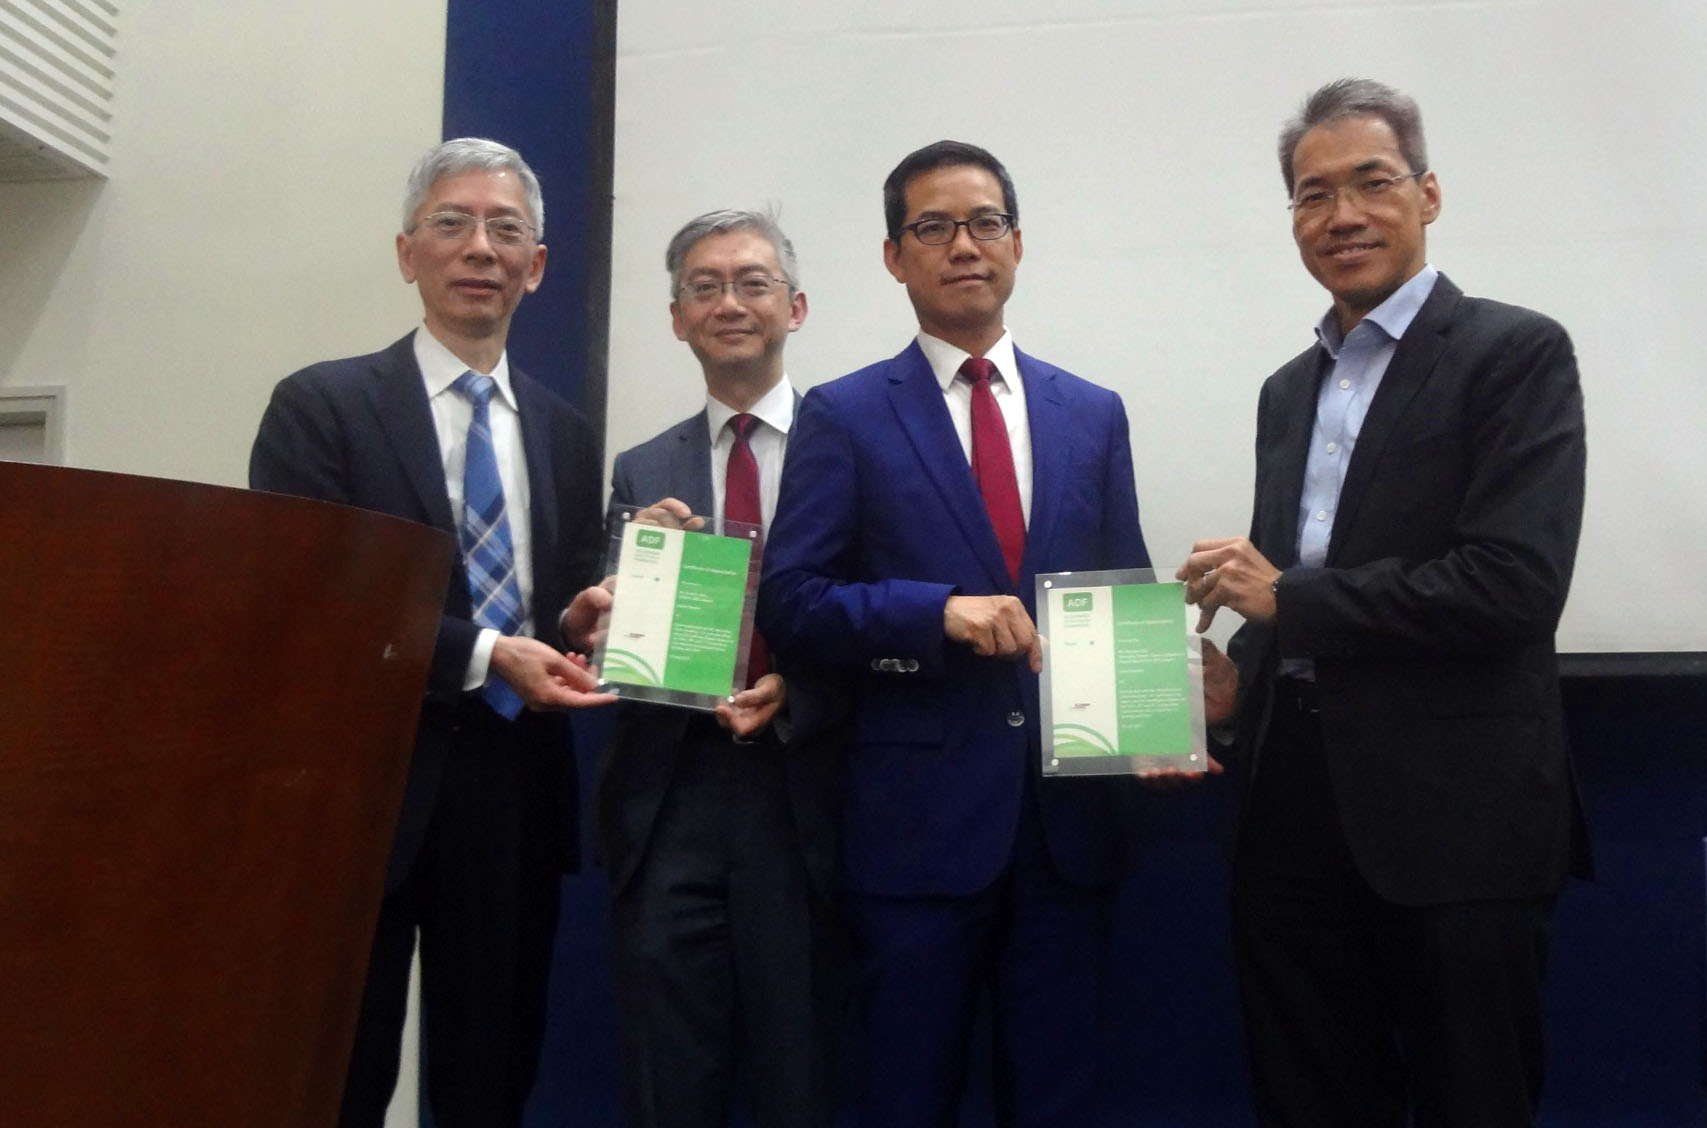 Mr Sherman Yan and Mr Dominic Wai gave a seminar for the Accounting Development Foundation and the Institute of Accountants in Management on dawn raids and investigative powers of regulators